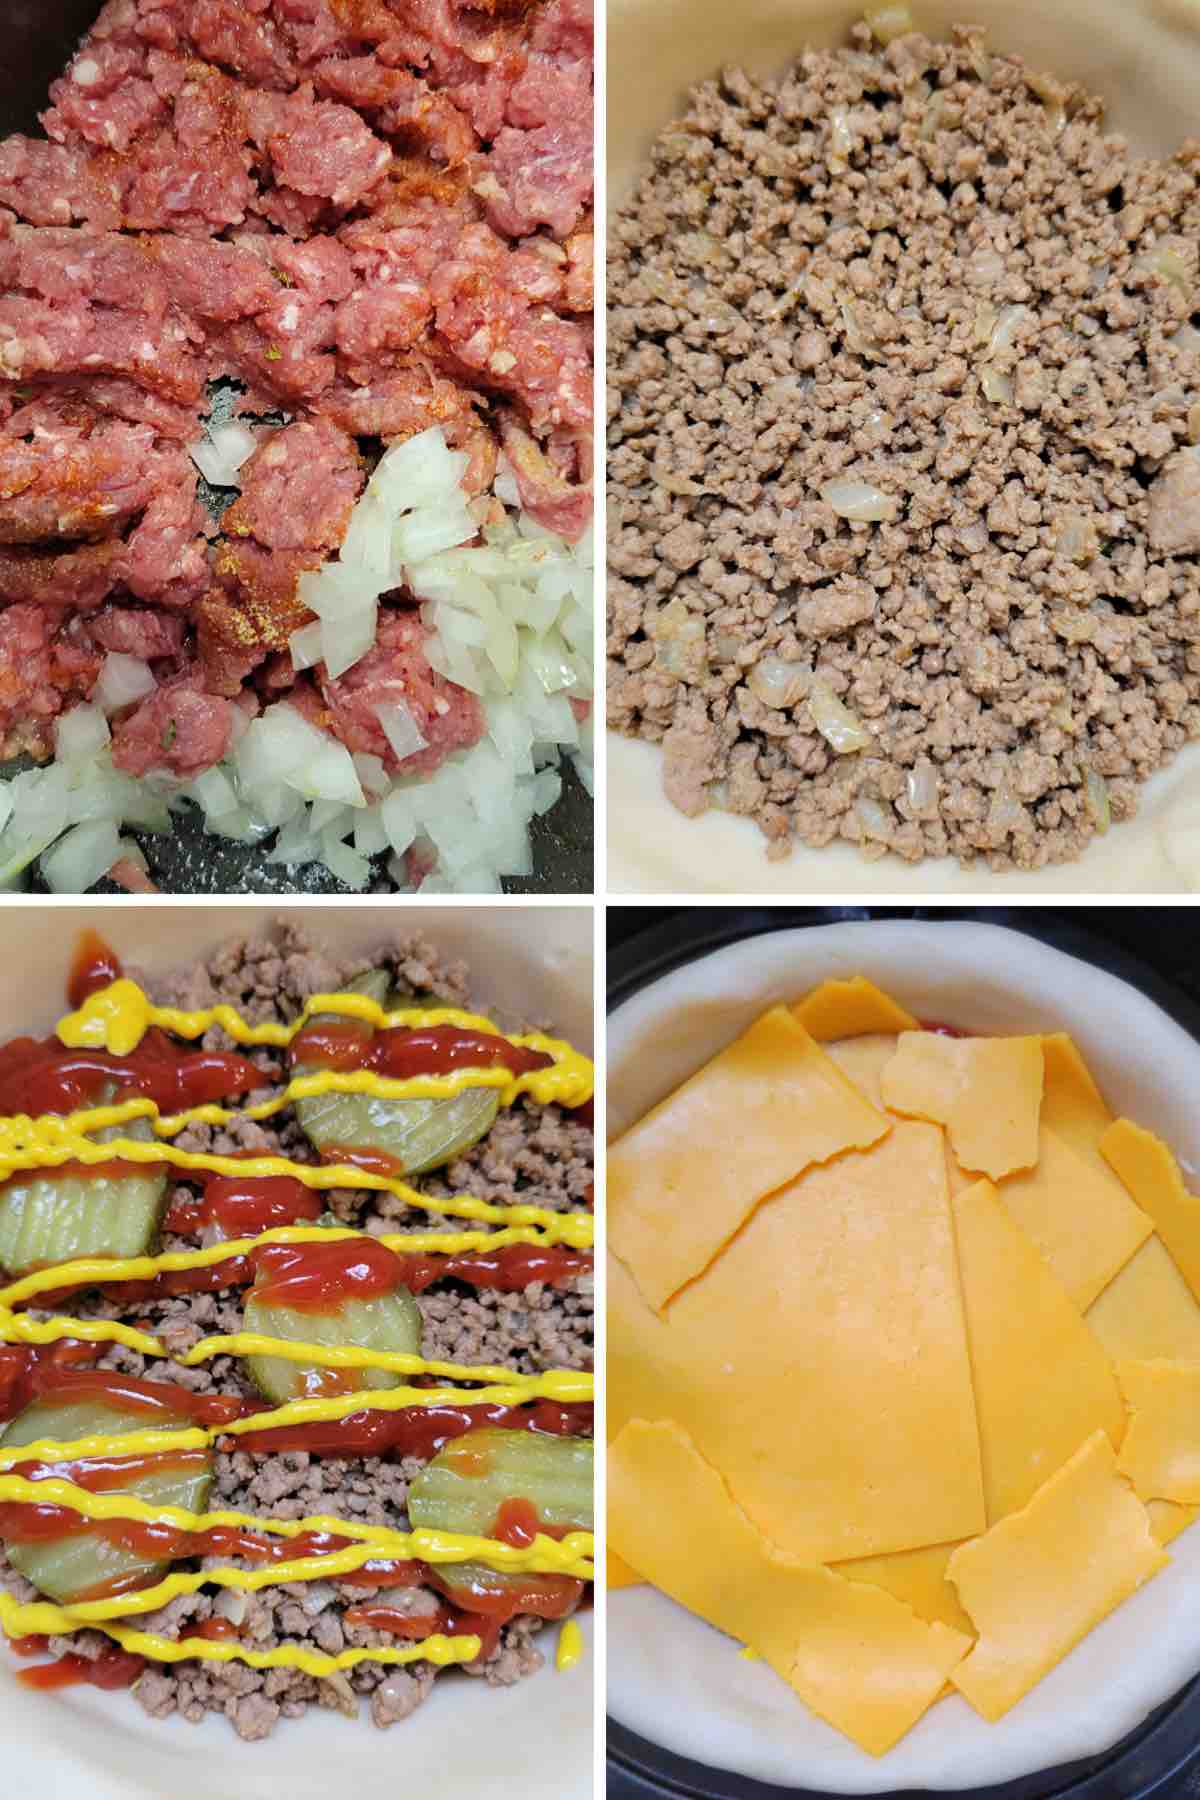 Cook the ground beef first, then transfer to the pie crust and add all of the toppings before air frying as shown in this photo.